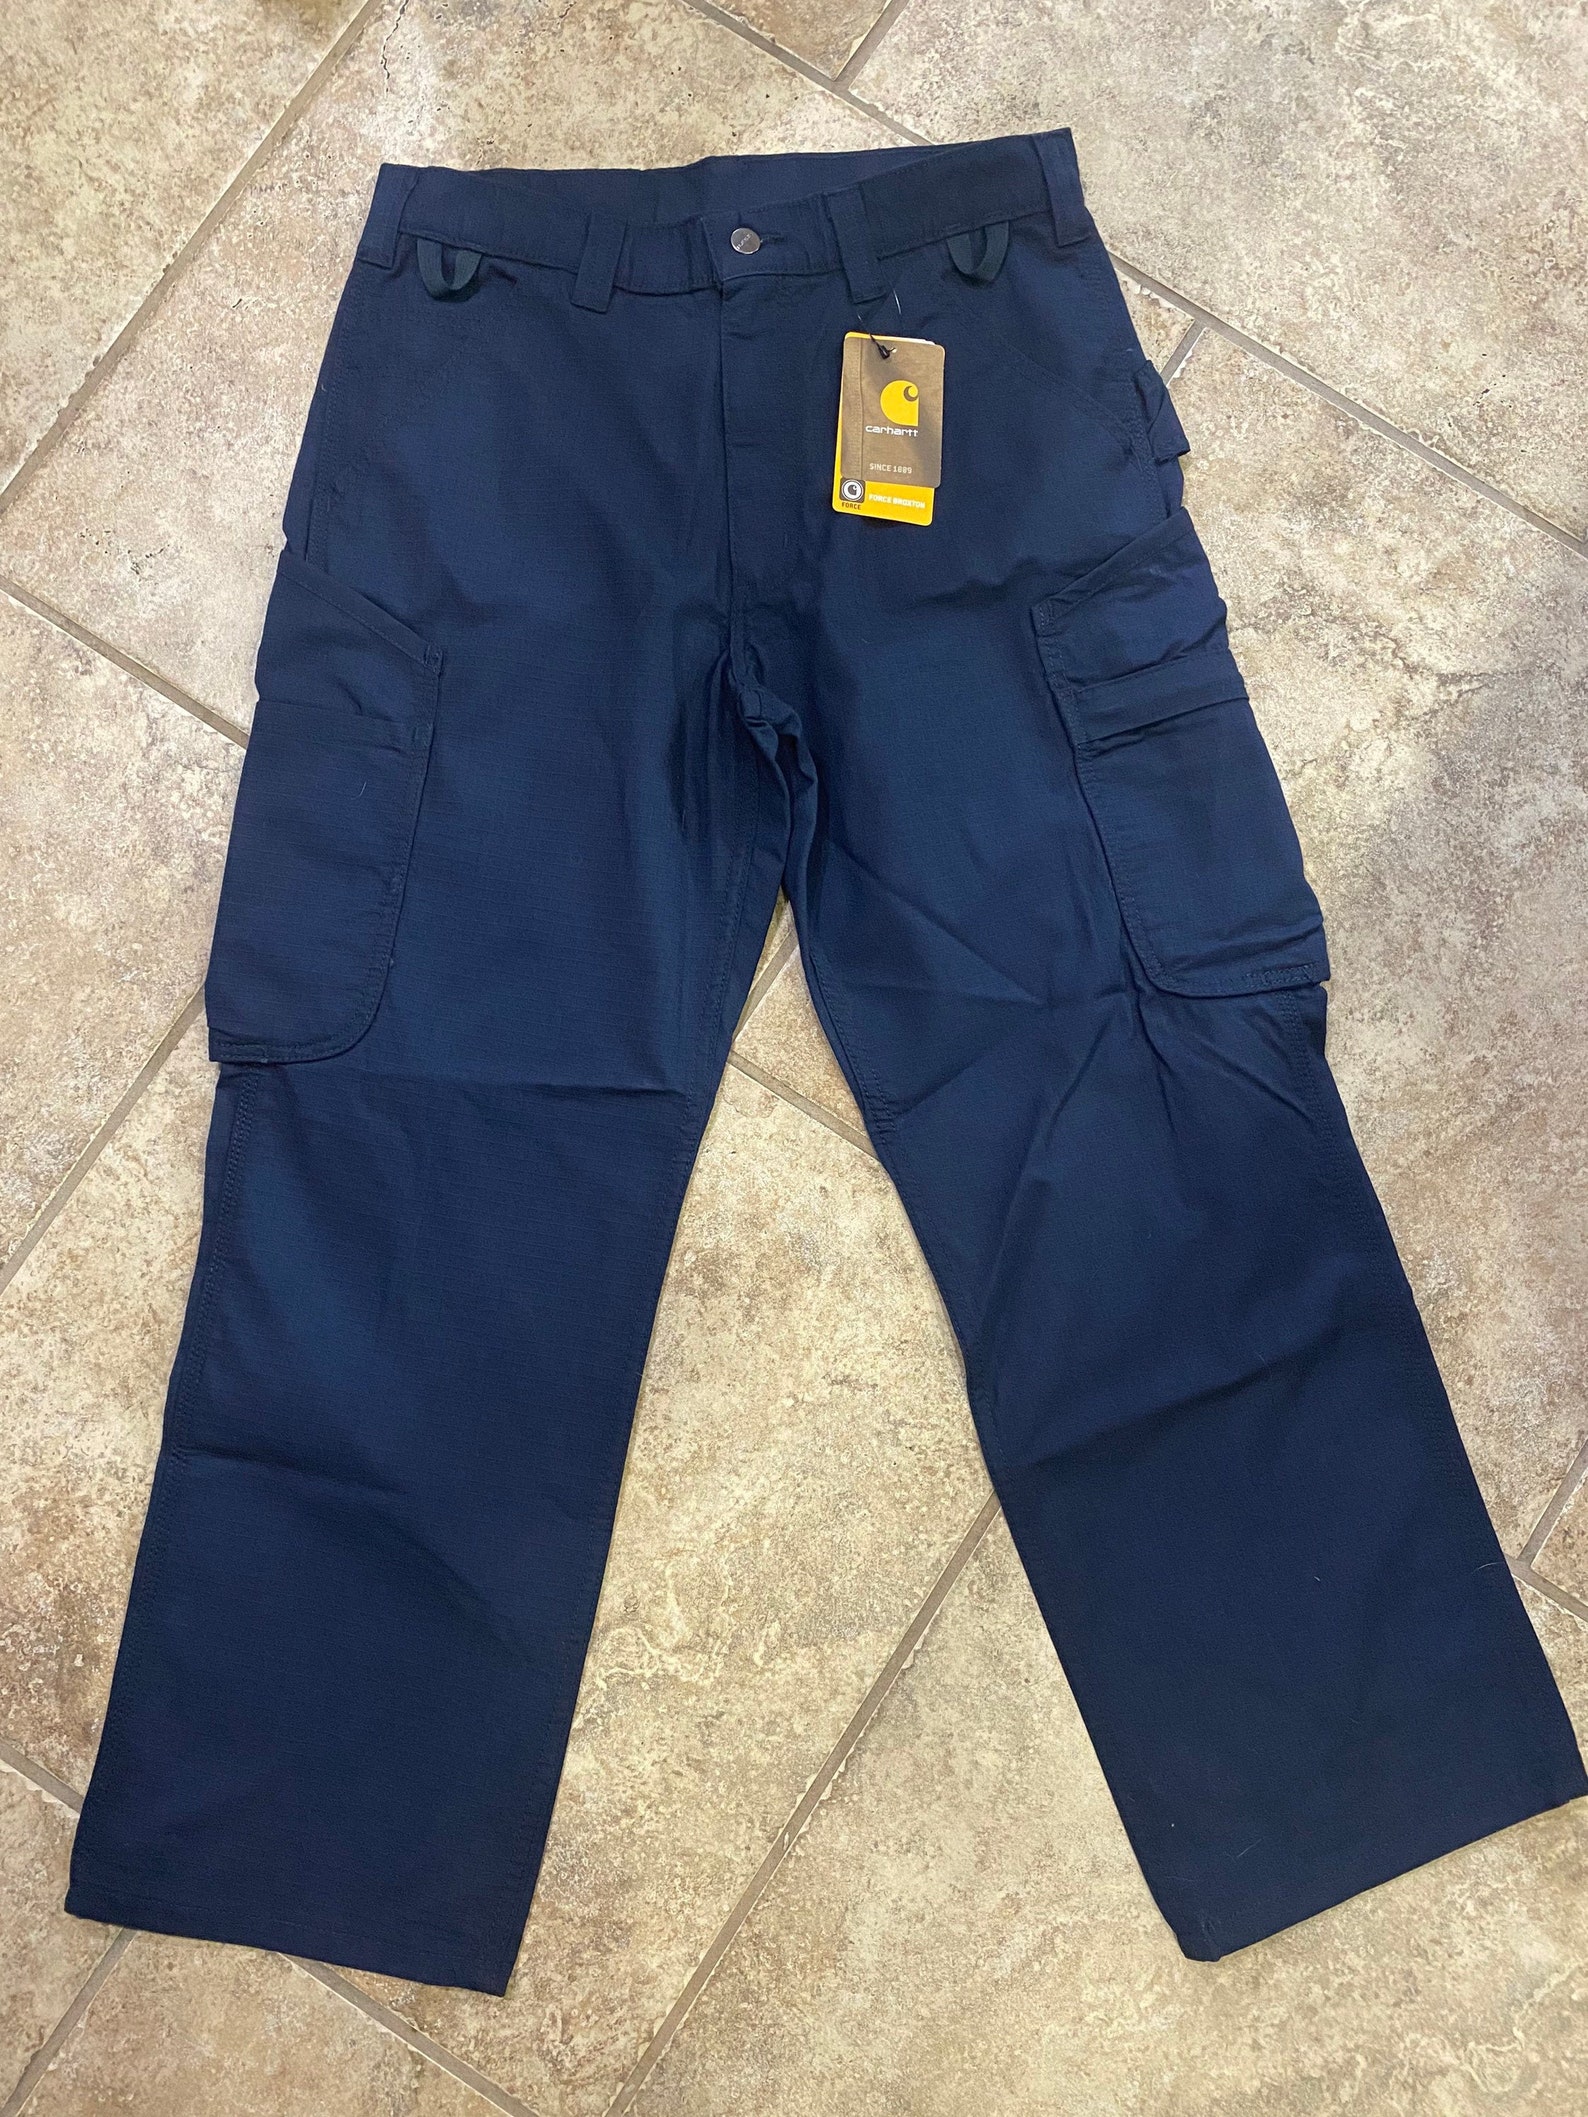 NWT Carhartt 103903 Loose Fit Force Broxton Cargo Navy Pant | Etsy